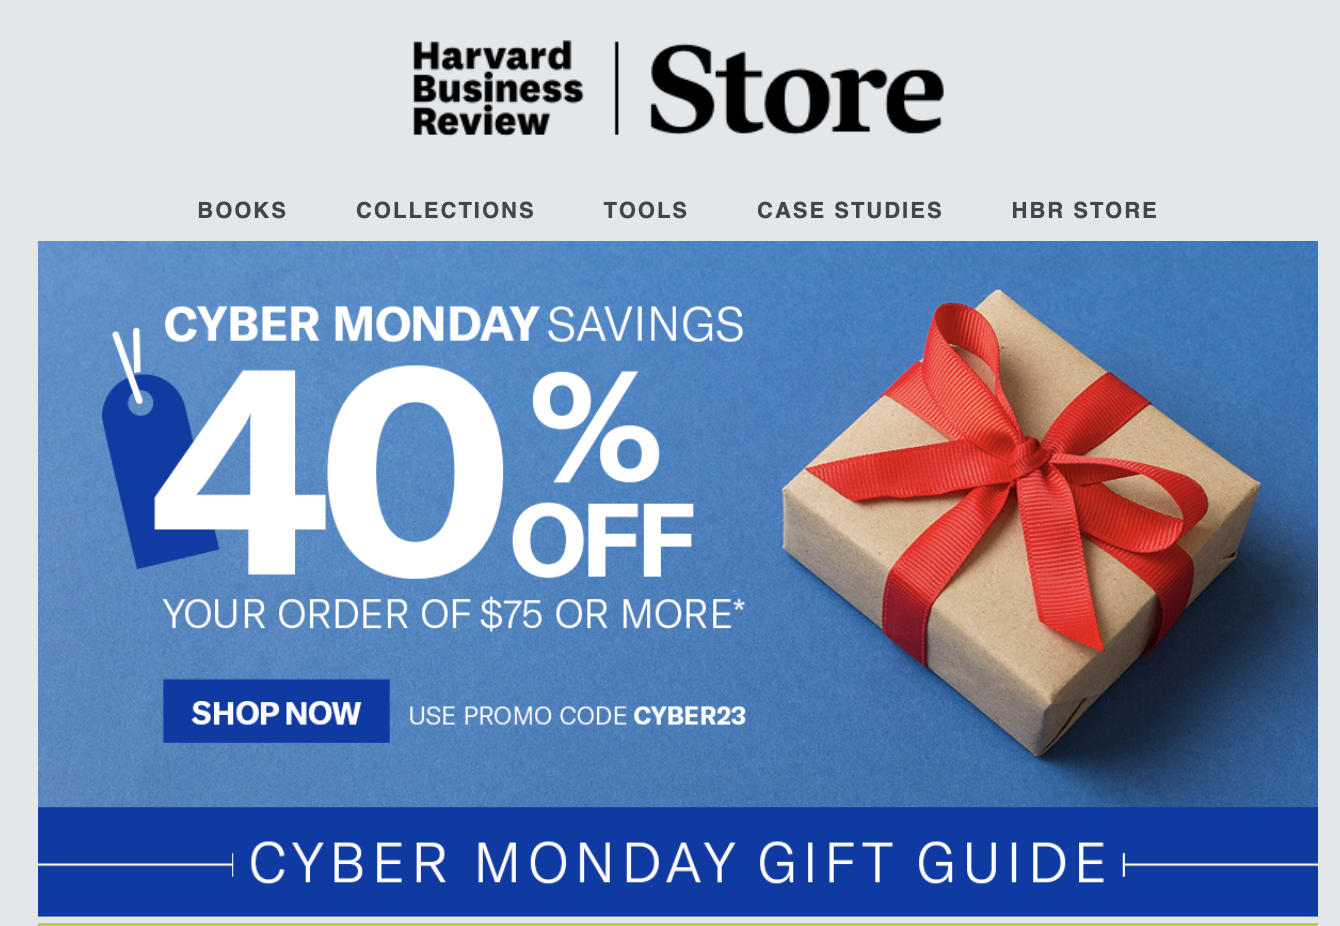 Harvard Business Review email marketing offers deep discounts for users who have shown intent by engaging with their content.